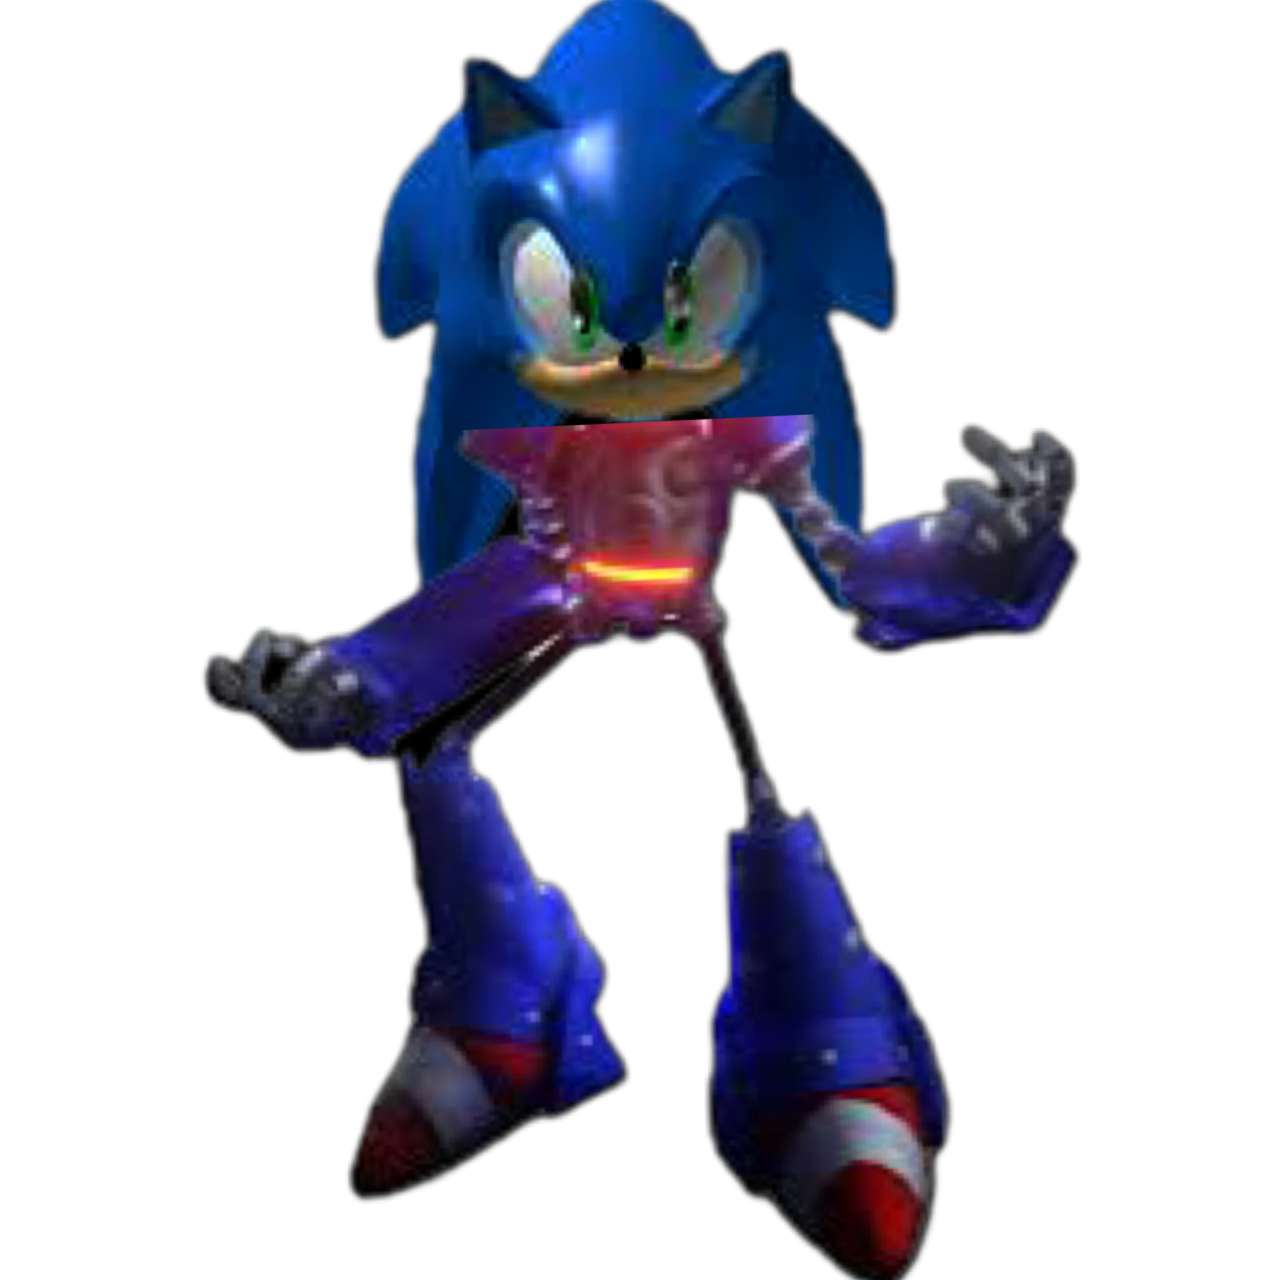 Mecha Sonic by spud0verlord on Newgrounds